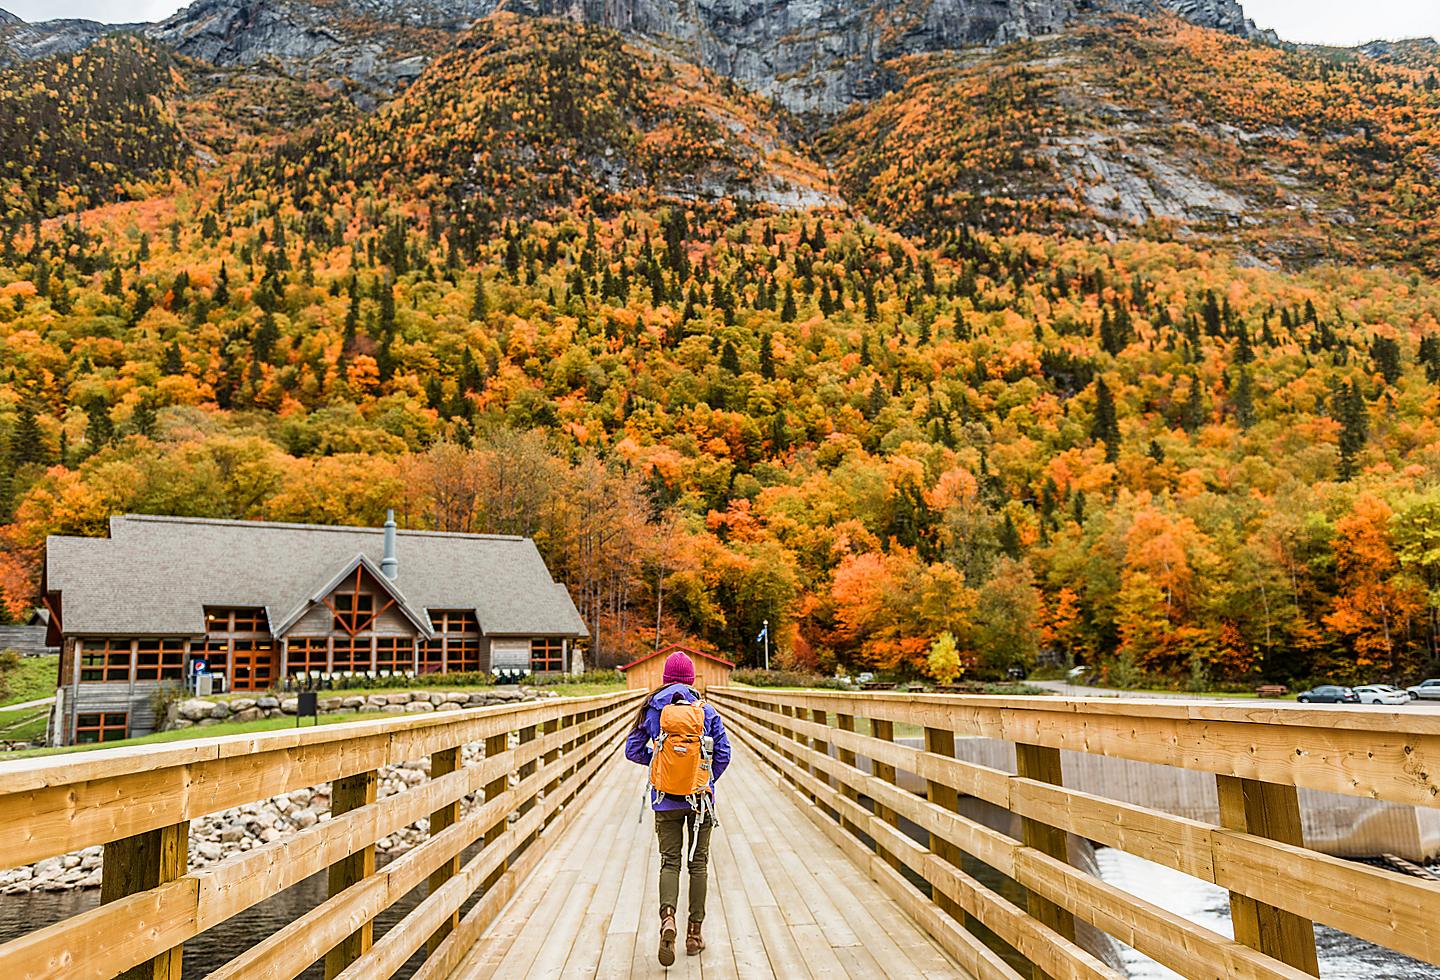 15 Best Places to See Fall Colors and Autumn Scenery | Royal Caribbean